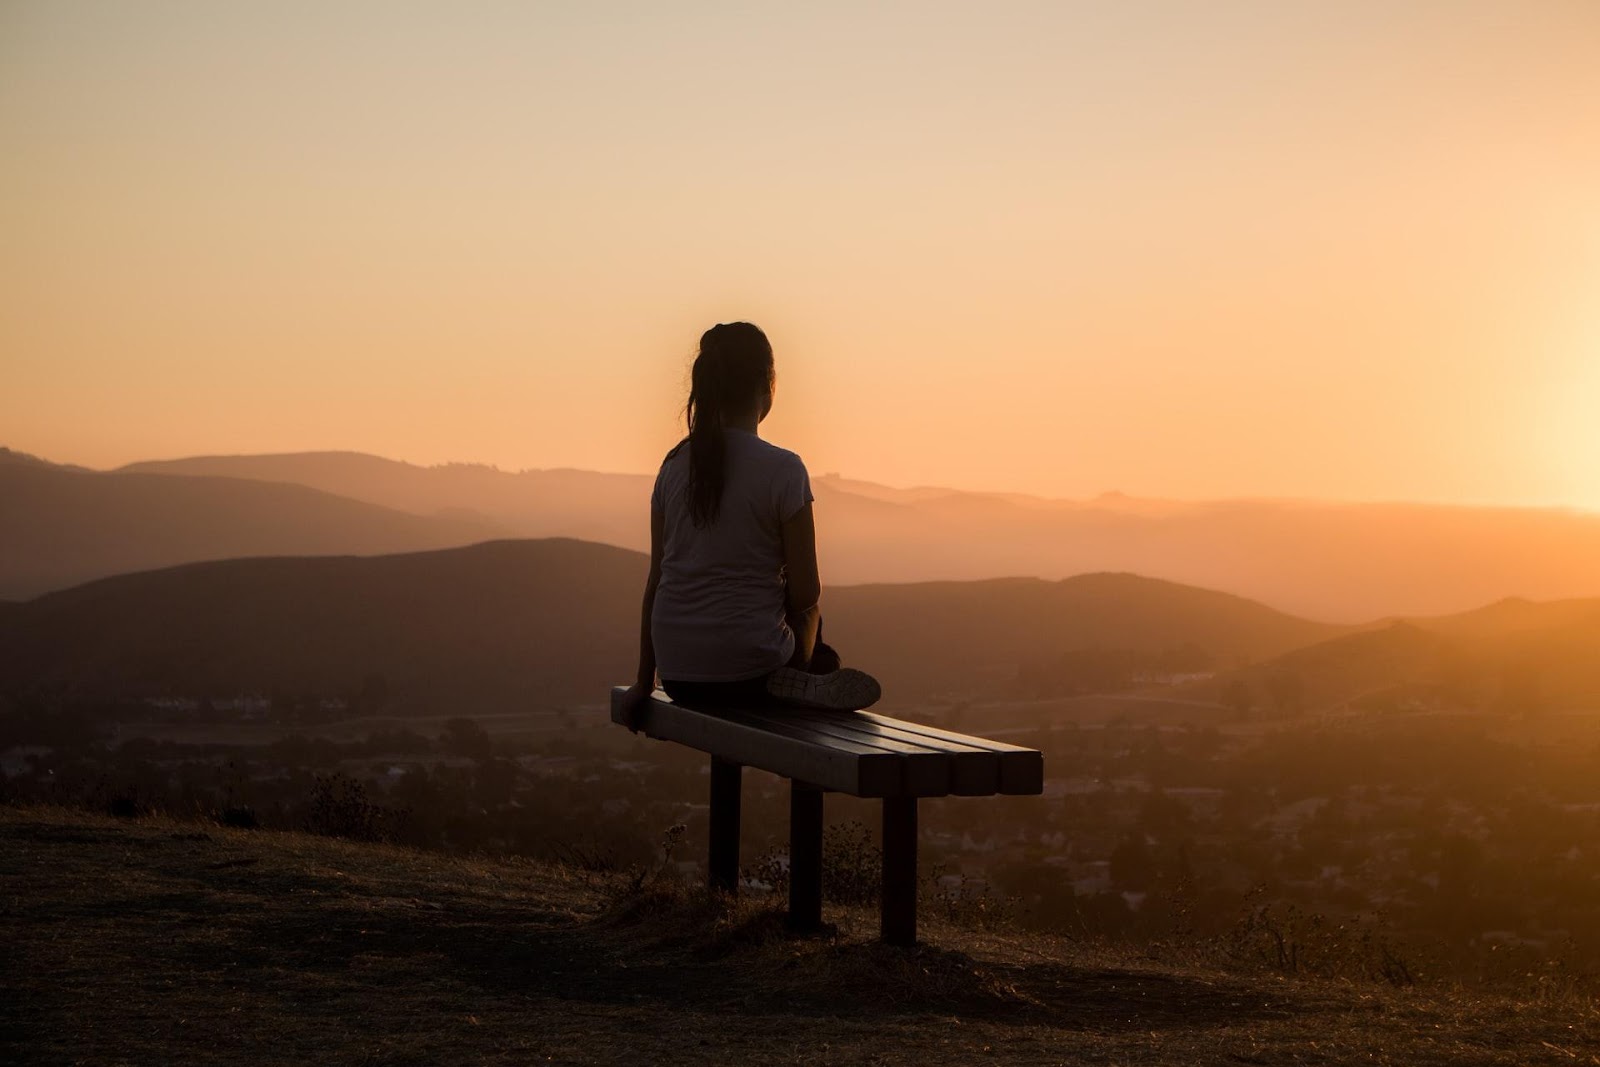 A picture of a woman watching the sunset because CarGuard Administration offers peace of mind for drivers.